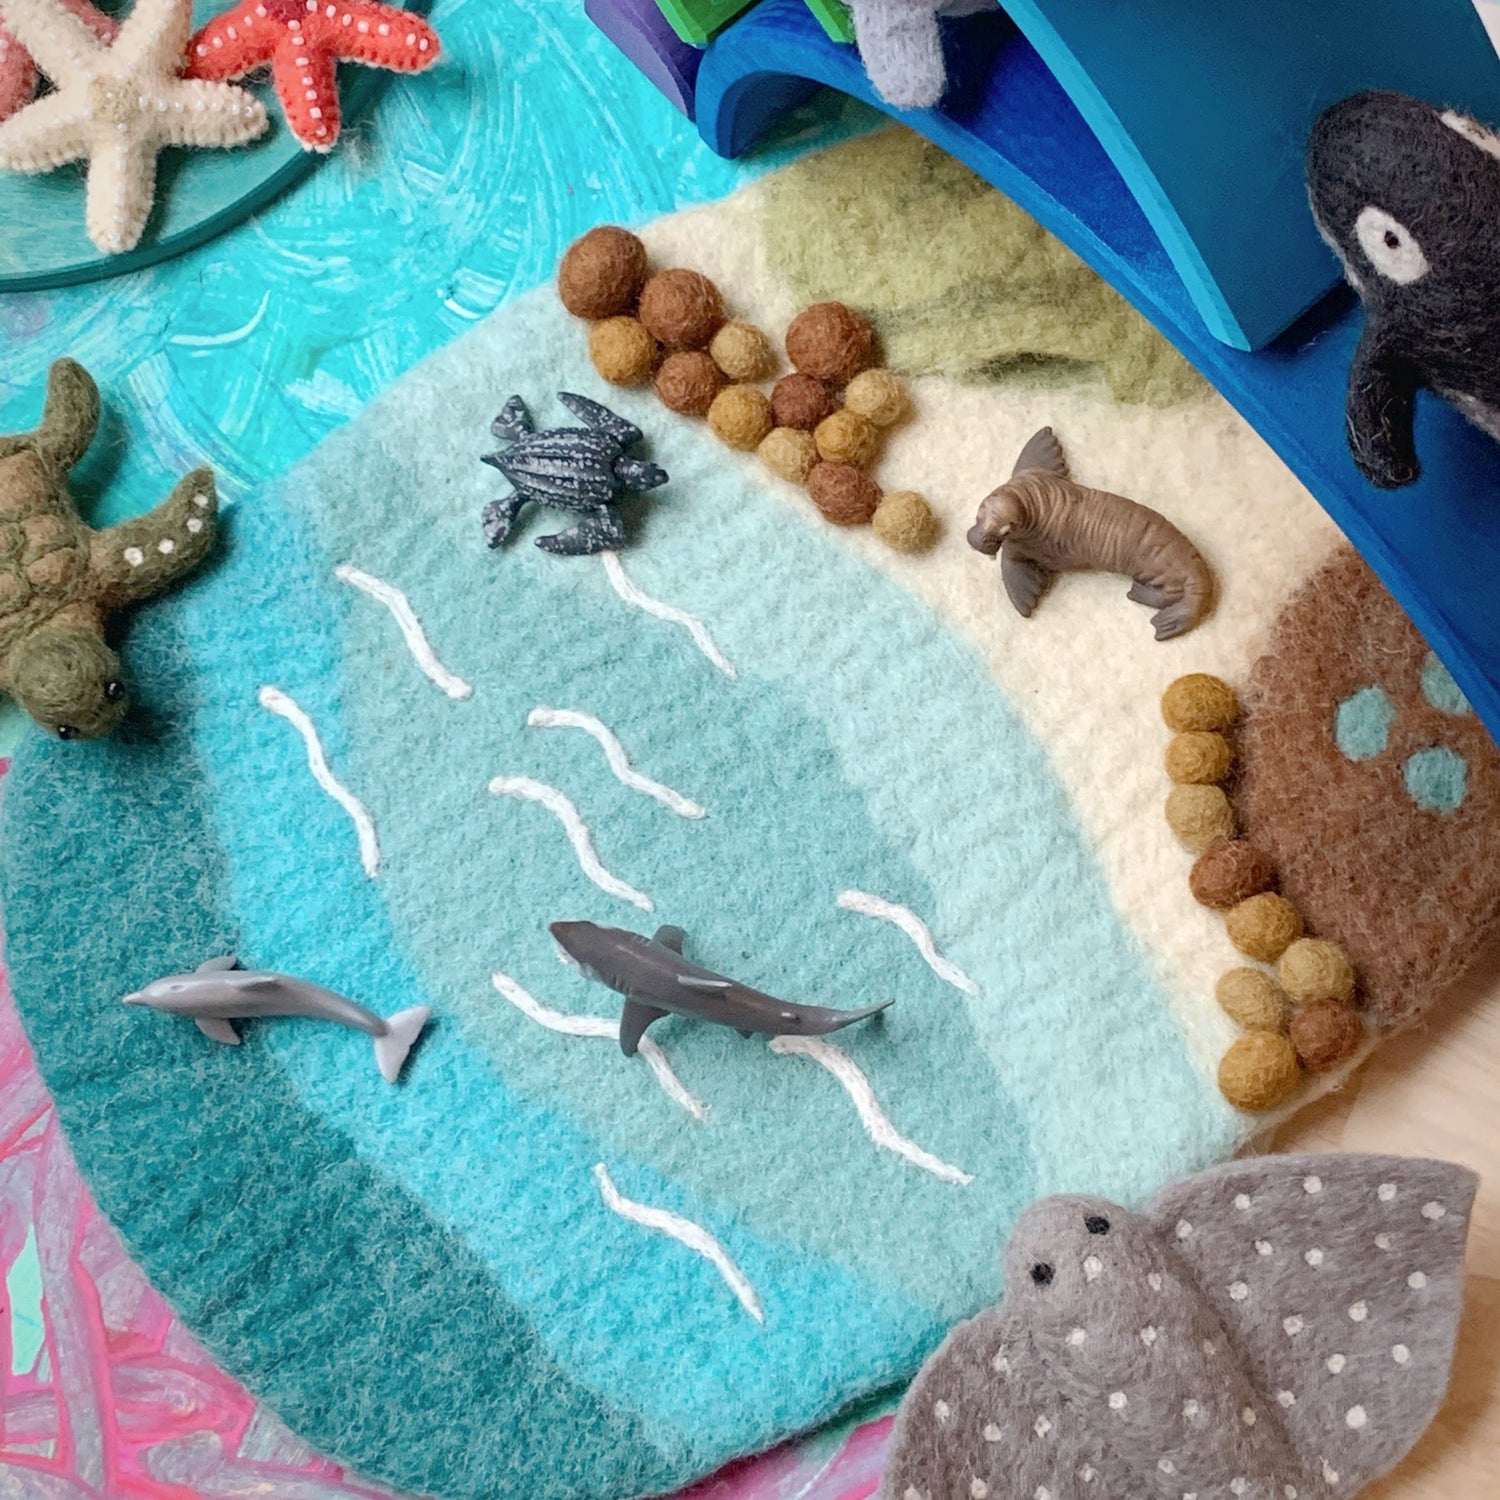 SEA, BEACH AND ROCKPOOL PLAY MAT PLAYSCAPE by TARA TREASURES - The Playful Collective